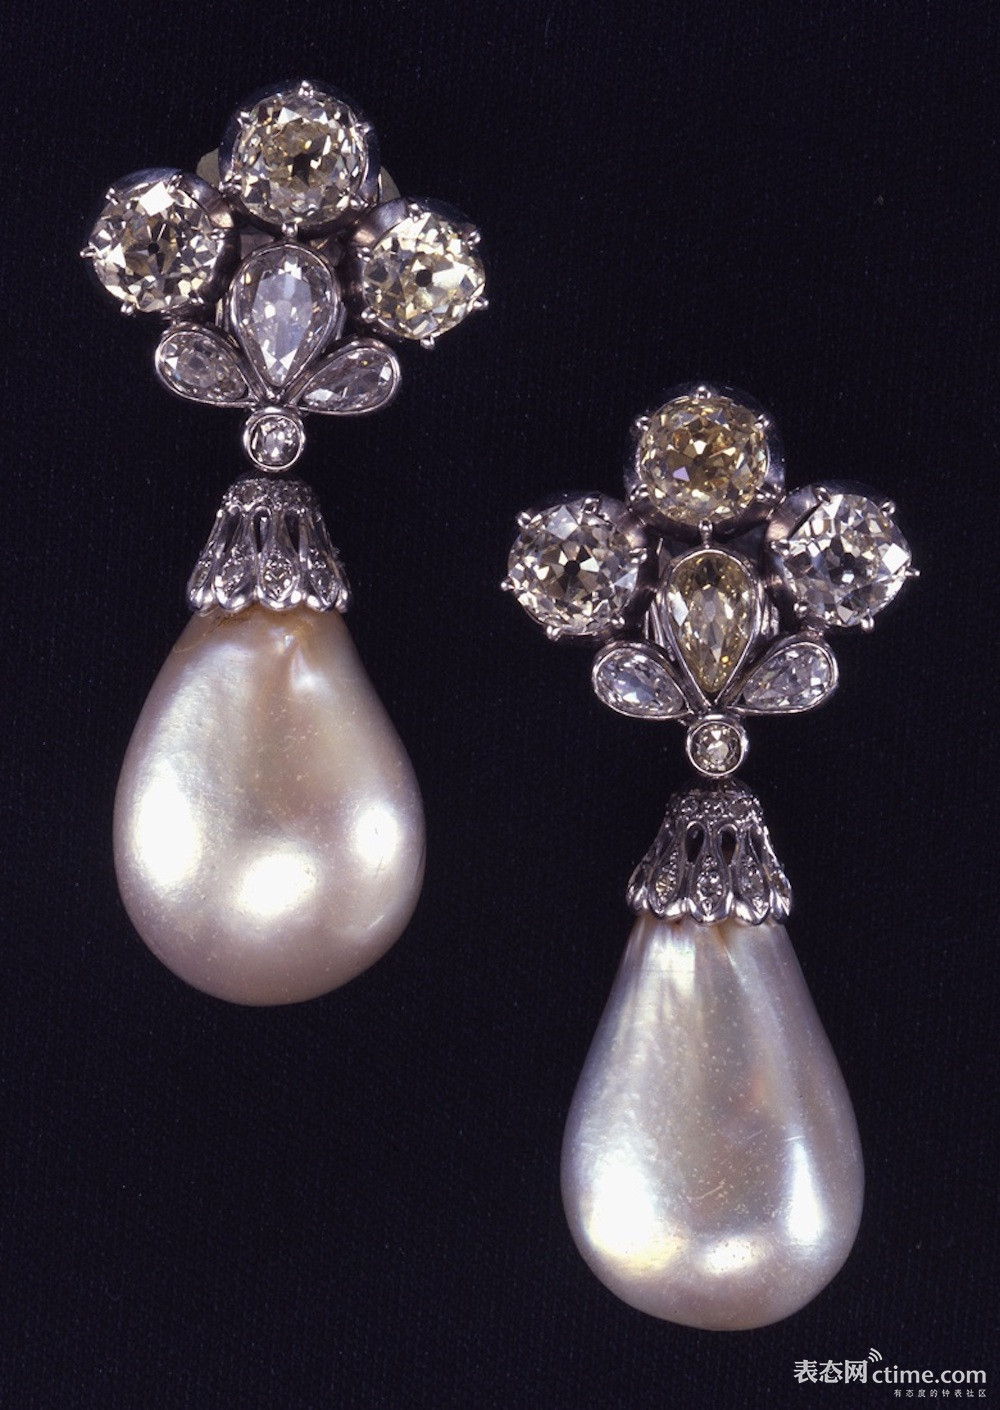 the-mancini-pearls-sold-at-christie-s-geneva-on-2-october-1969.jpg